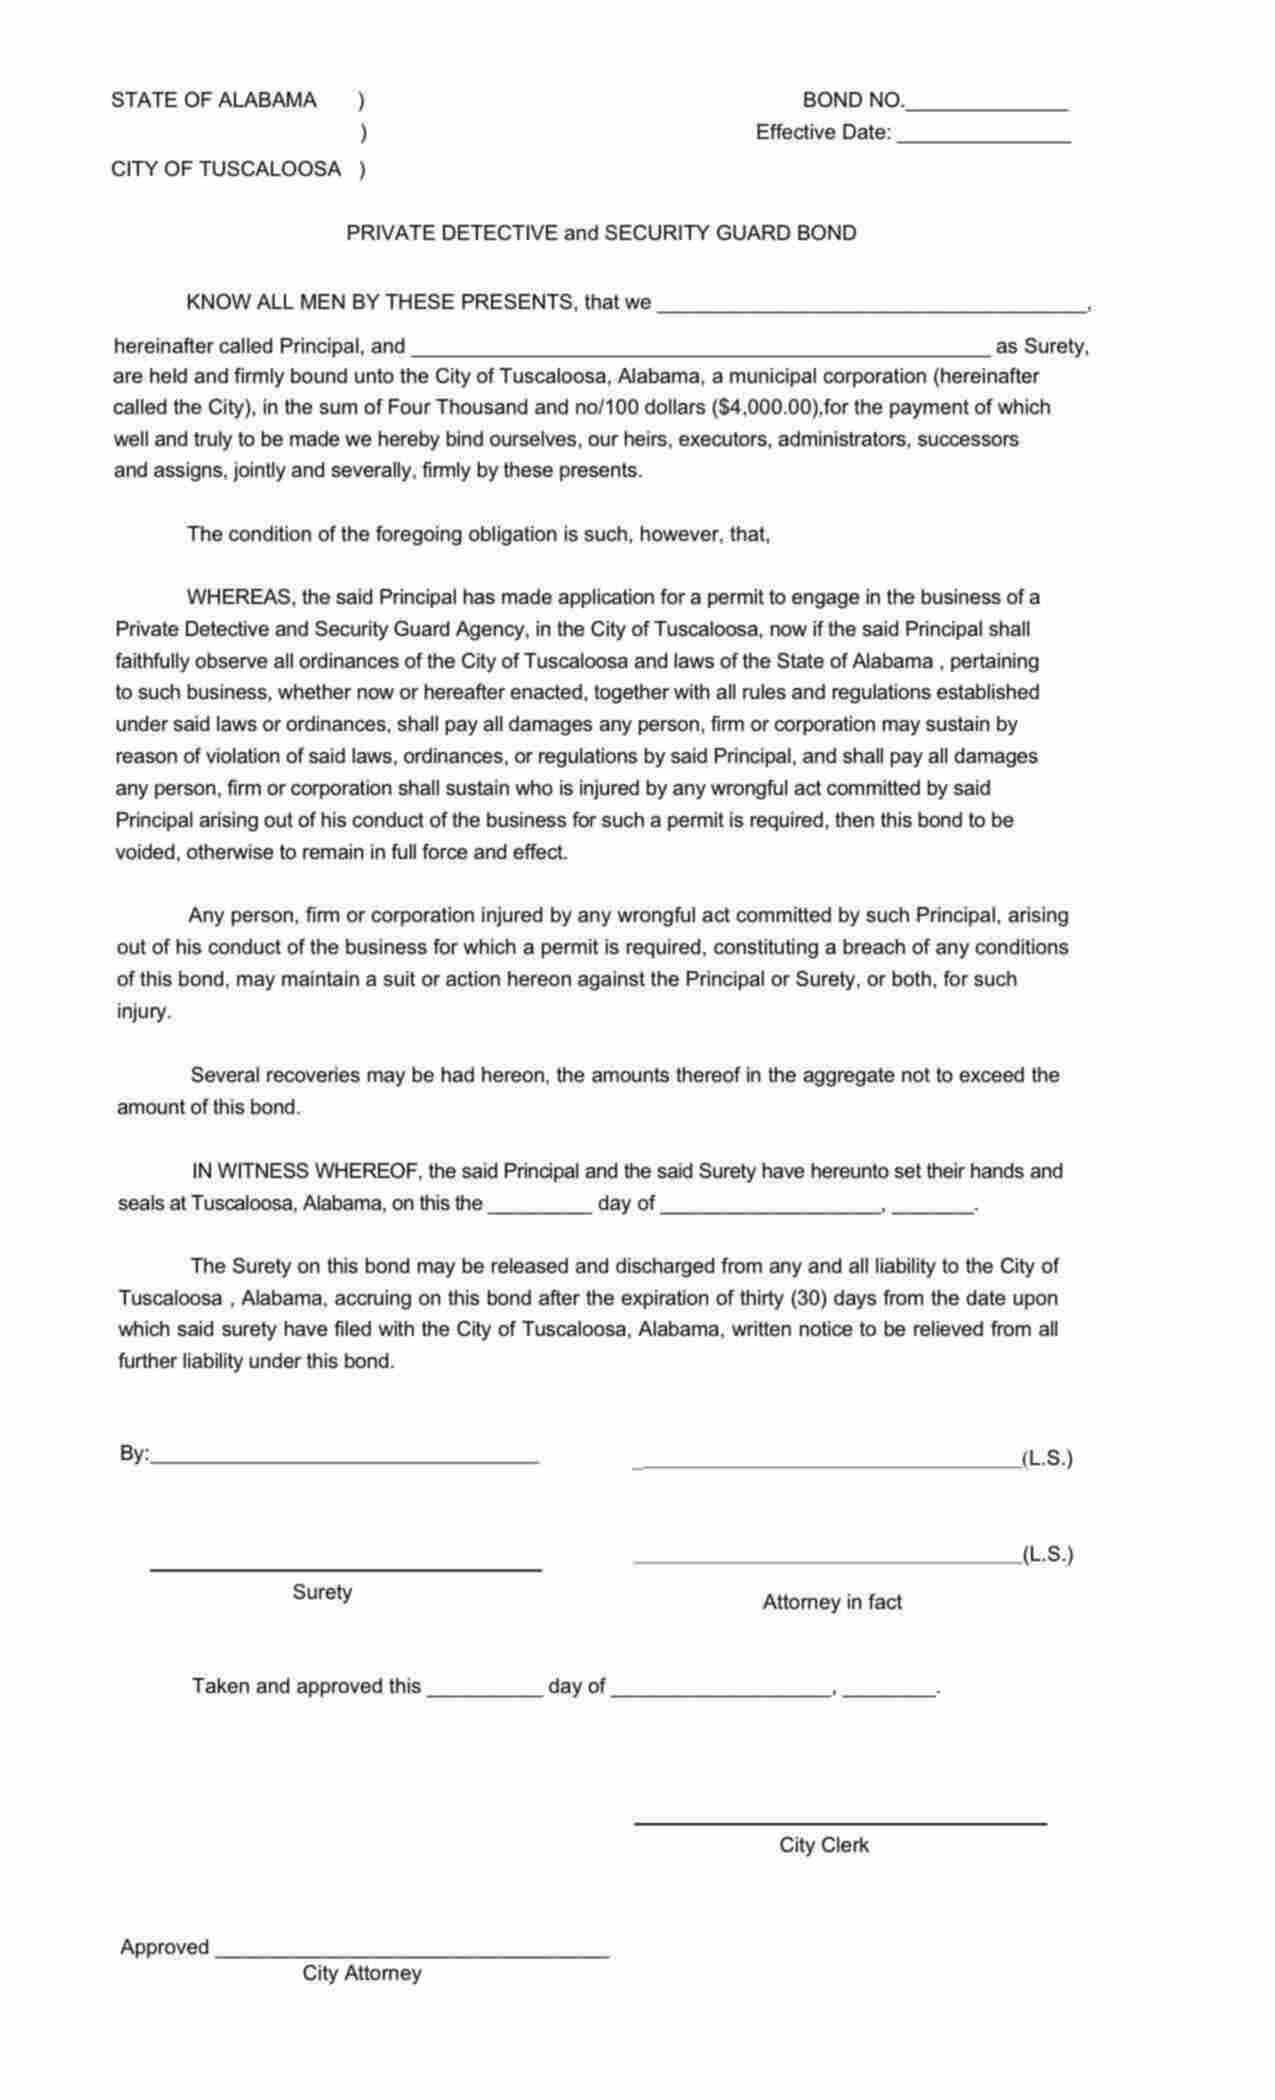 Alabama Private Detective and Security Guard Bond Form